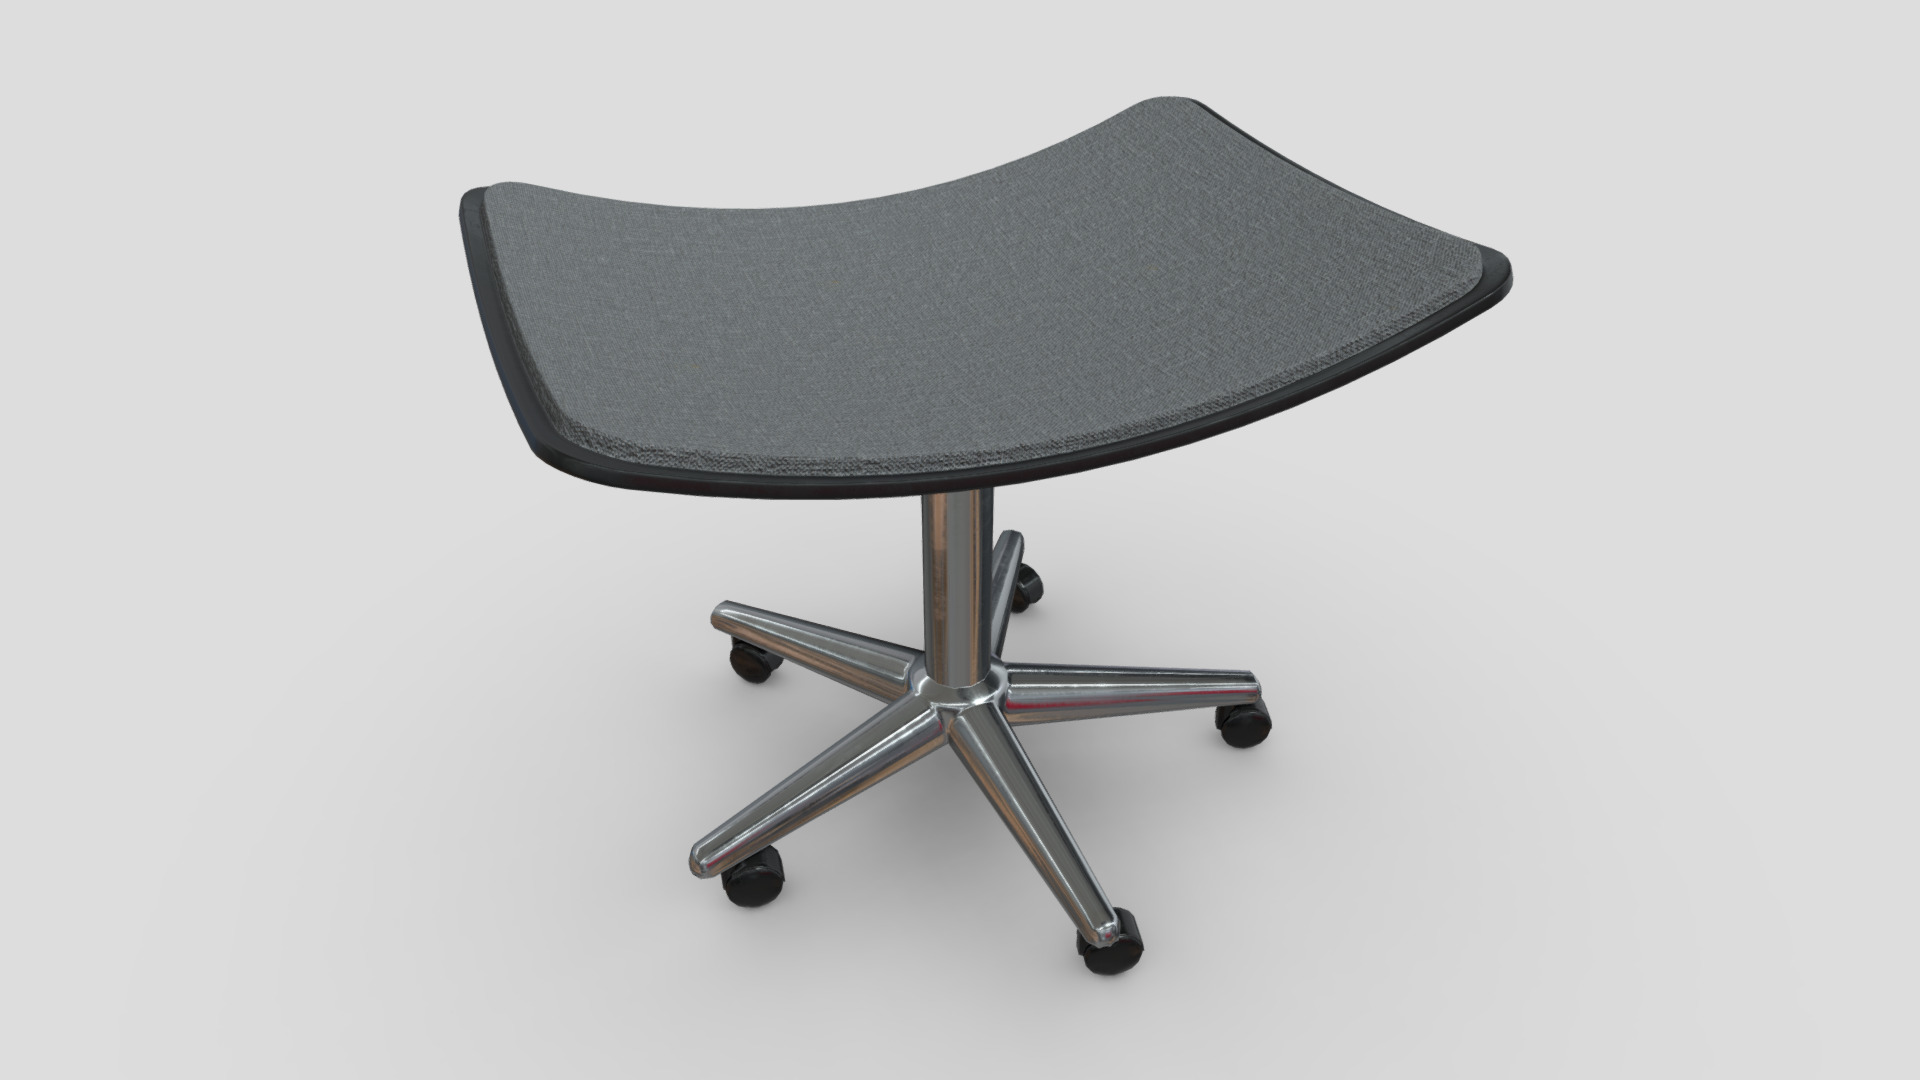 3D model Stool 2 - This is a 3D model of the Stool 2. The 3D model is about a black chair with wheels.